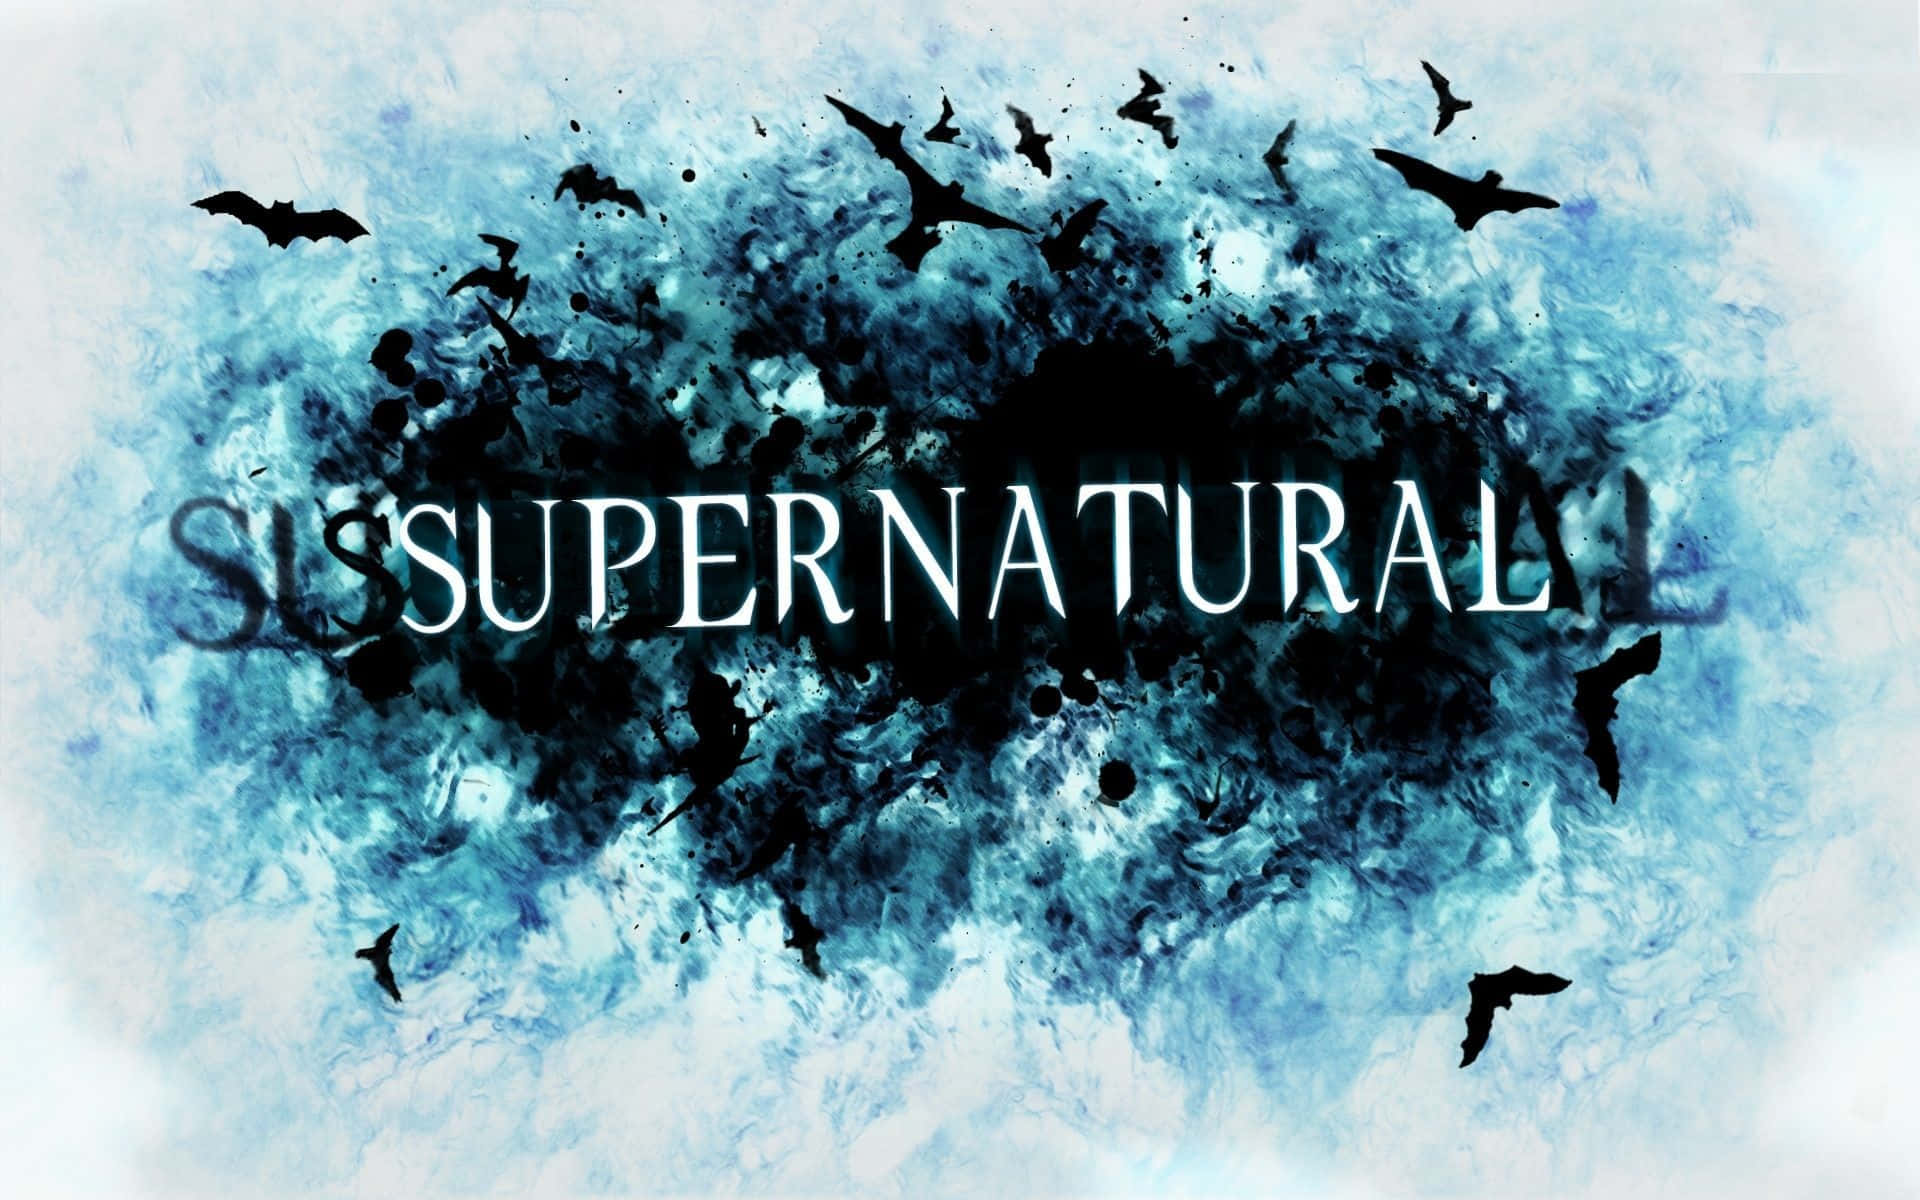 Sam and Dean fight monsters in Supernatural